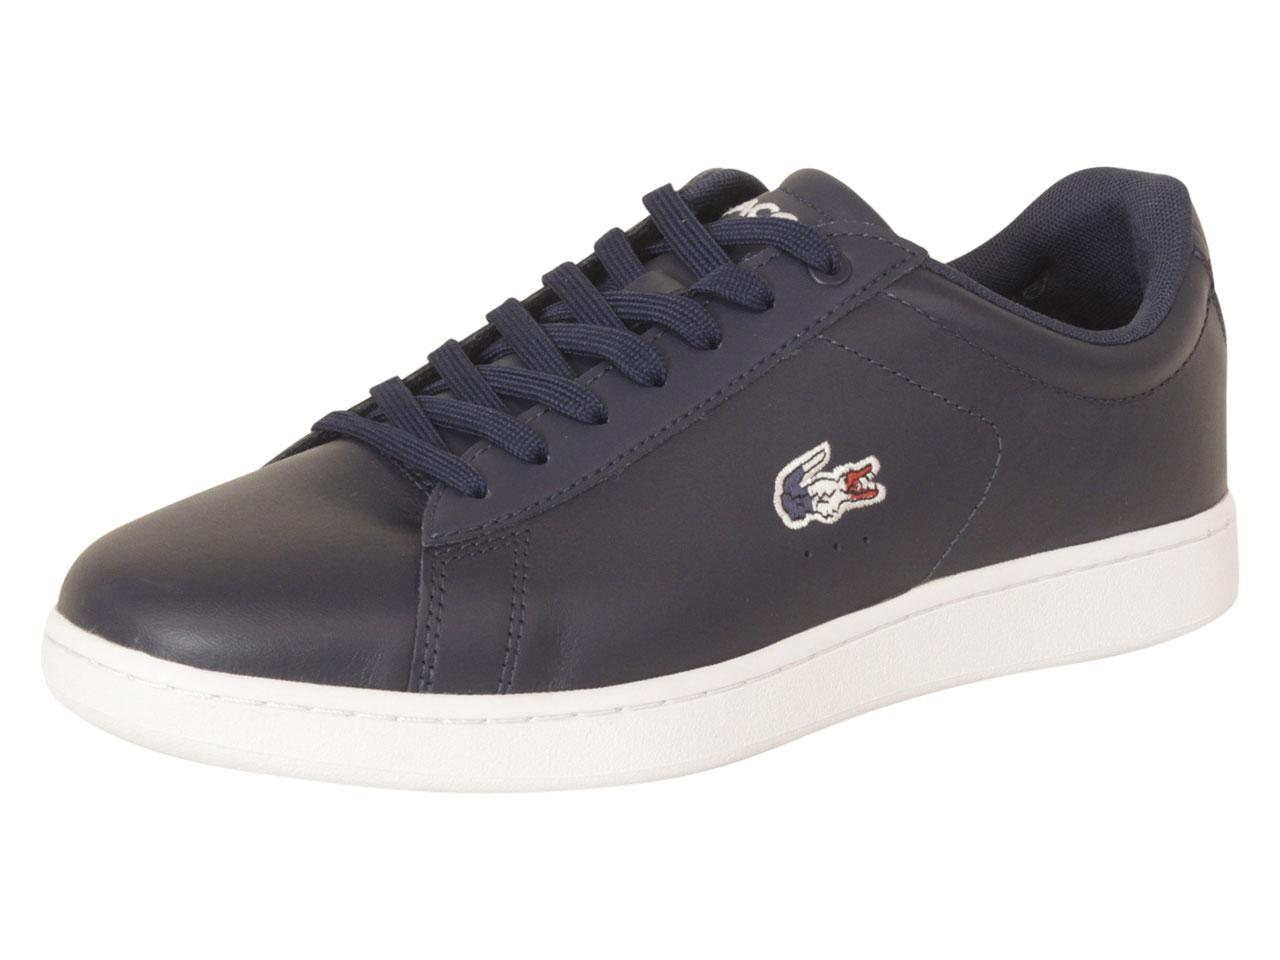 - Navy/White/Red - 11 D(M) US -  Lacoste